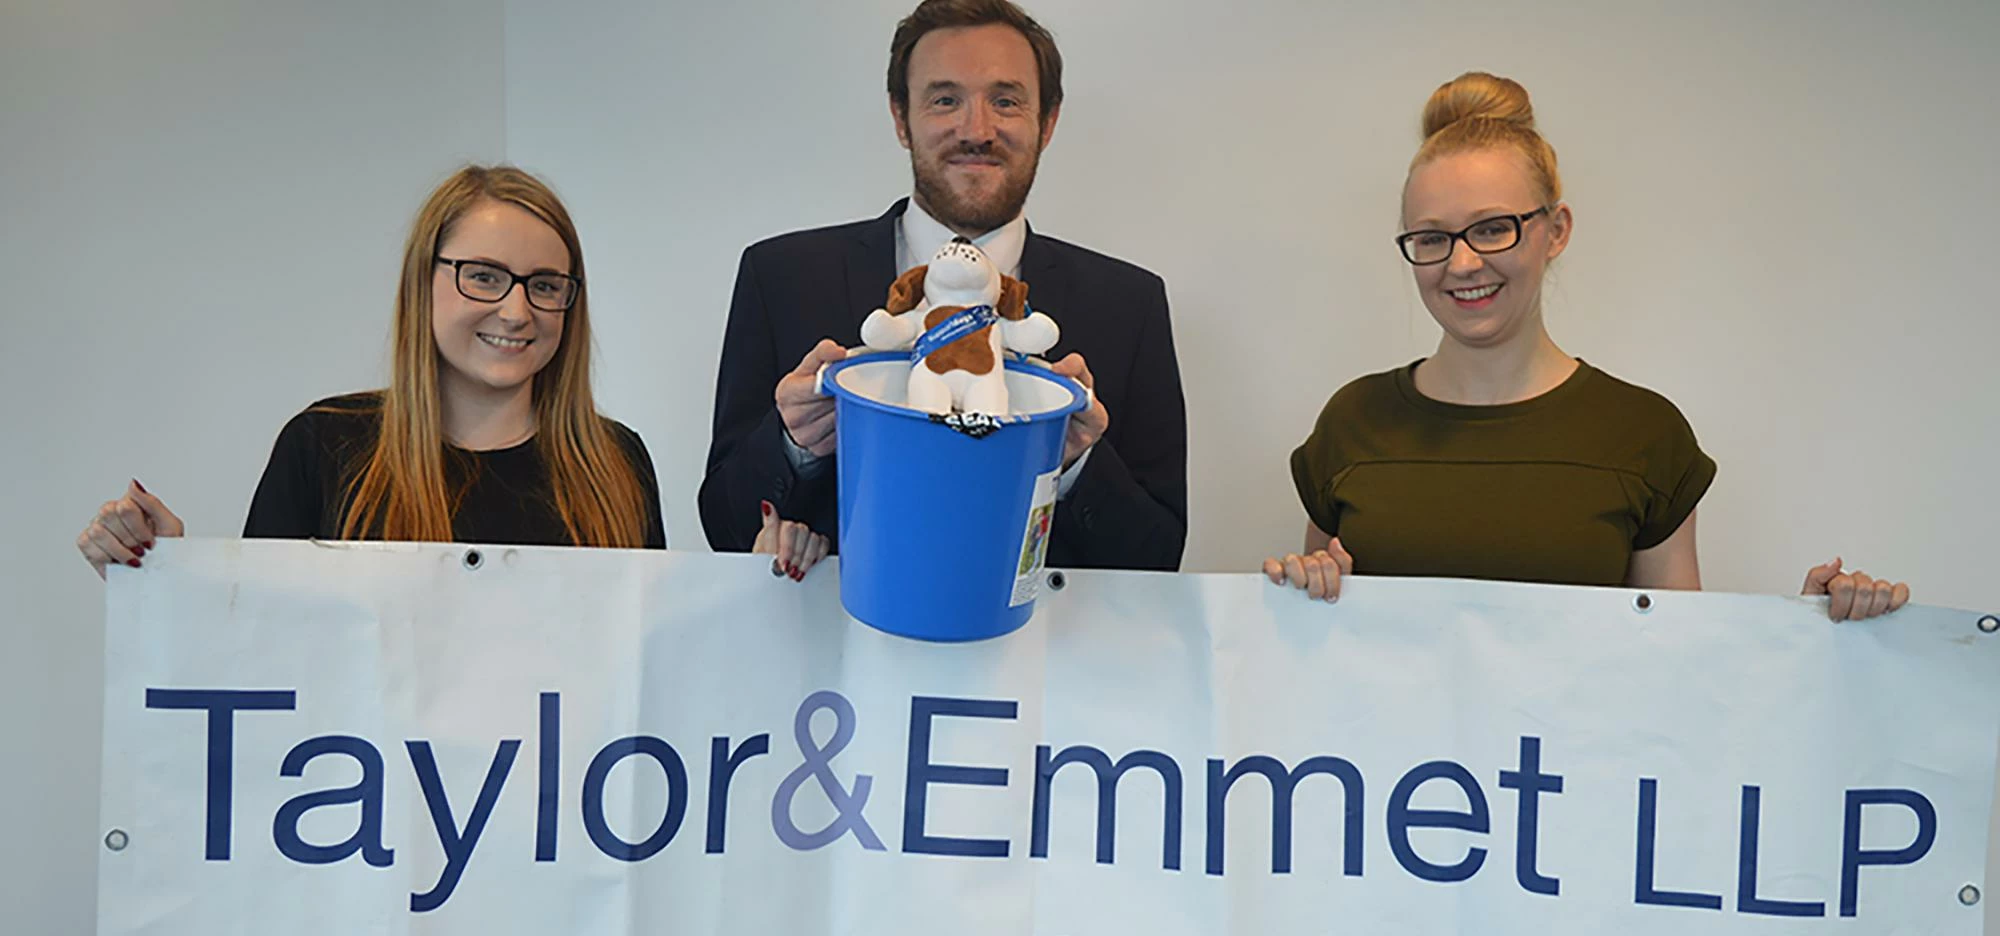 Taylor&Emmet's Colour Obstacle Rush team (left to right), Jenni Arundale, John Green and Elsa Russel